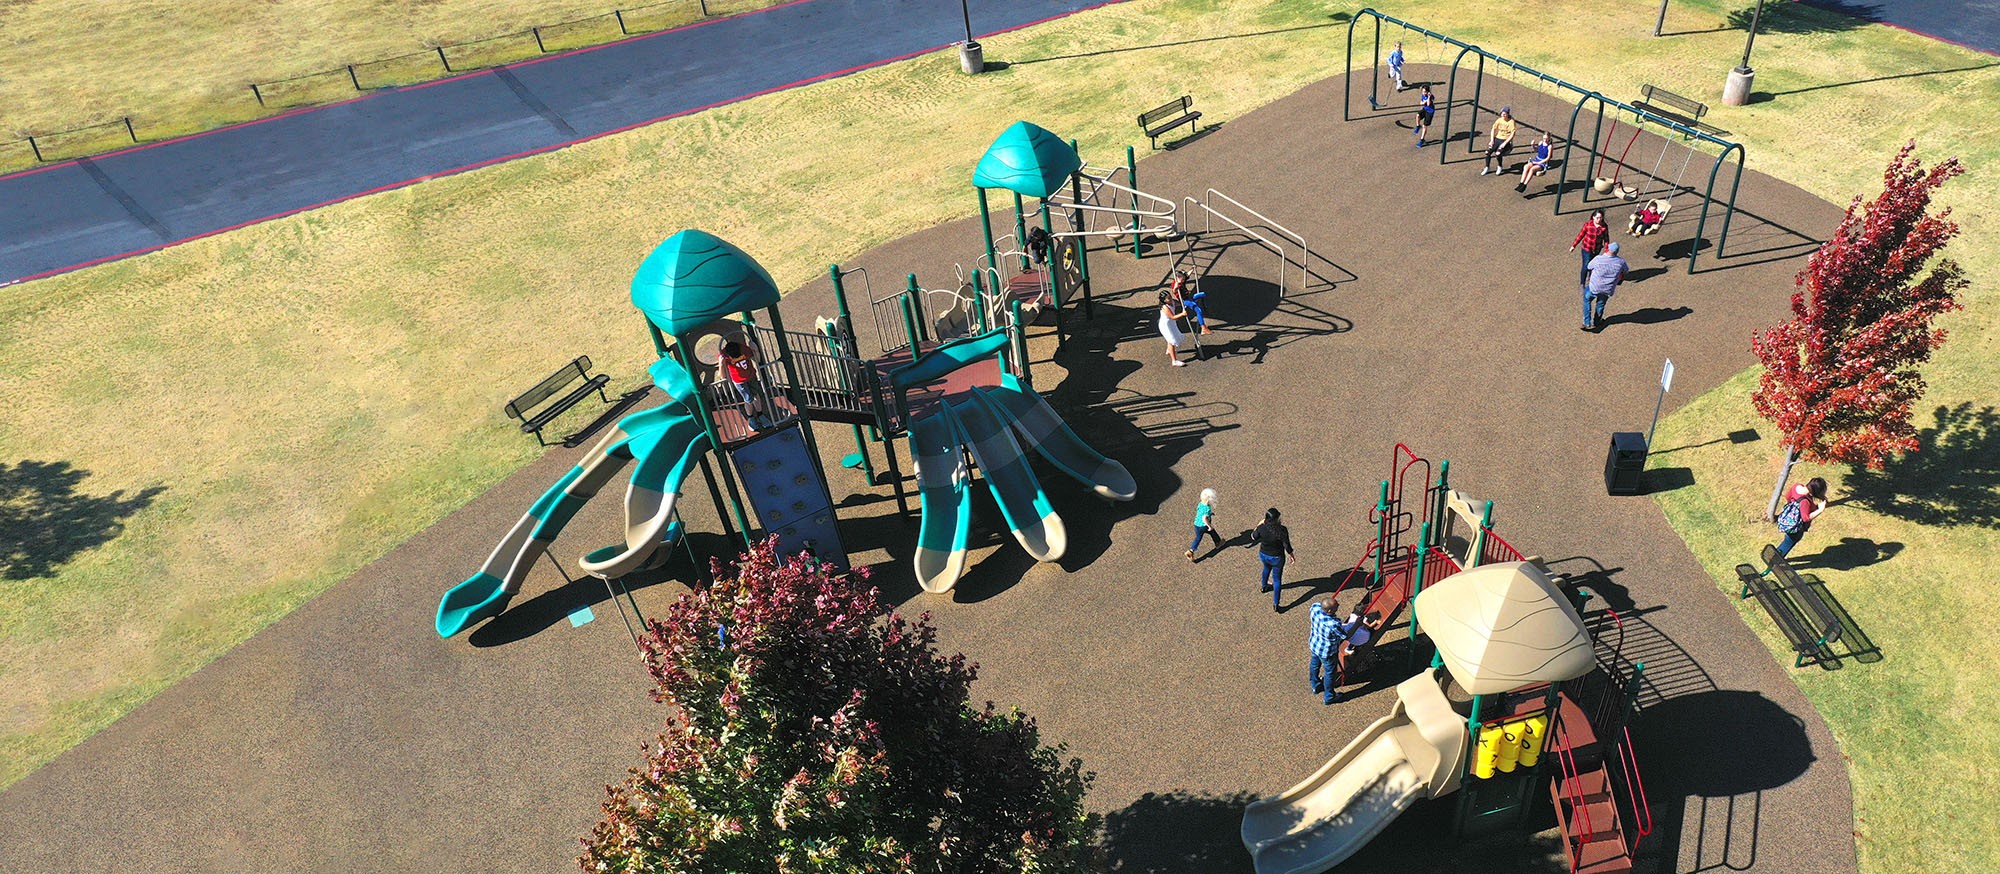 Featured image of st-monica-overhead-view-playground